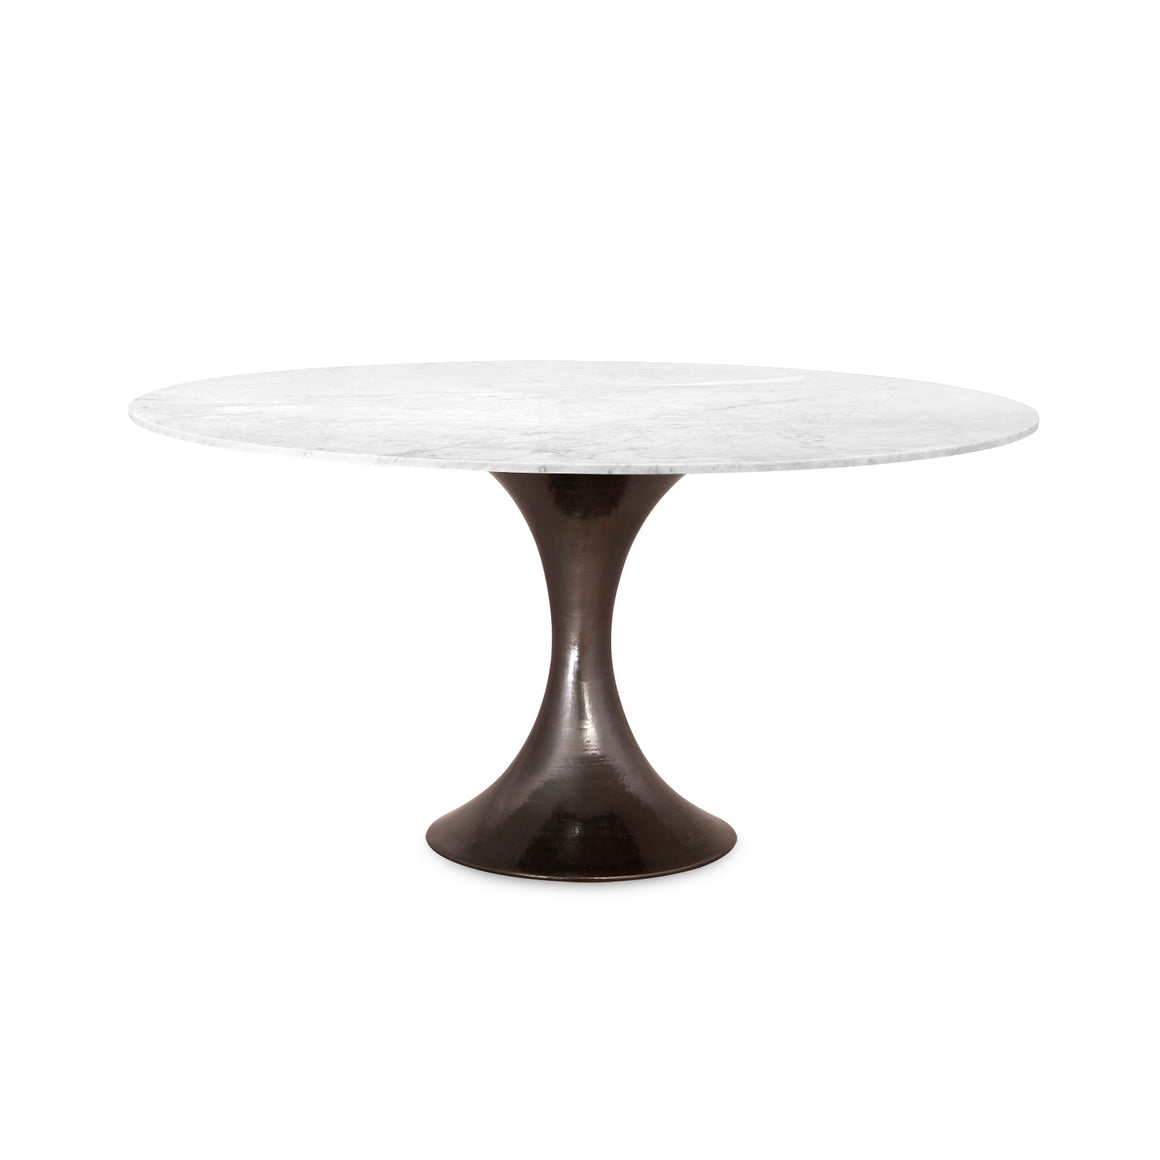 60" Dining Table Top in White | Stockholm Collection | Villa & House